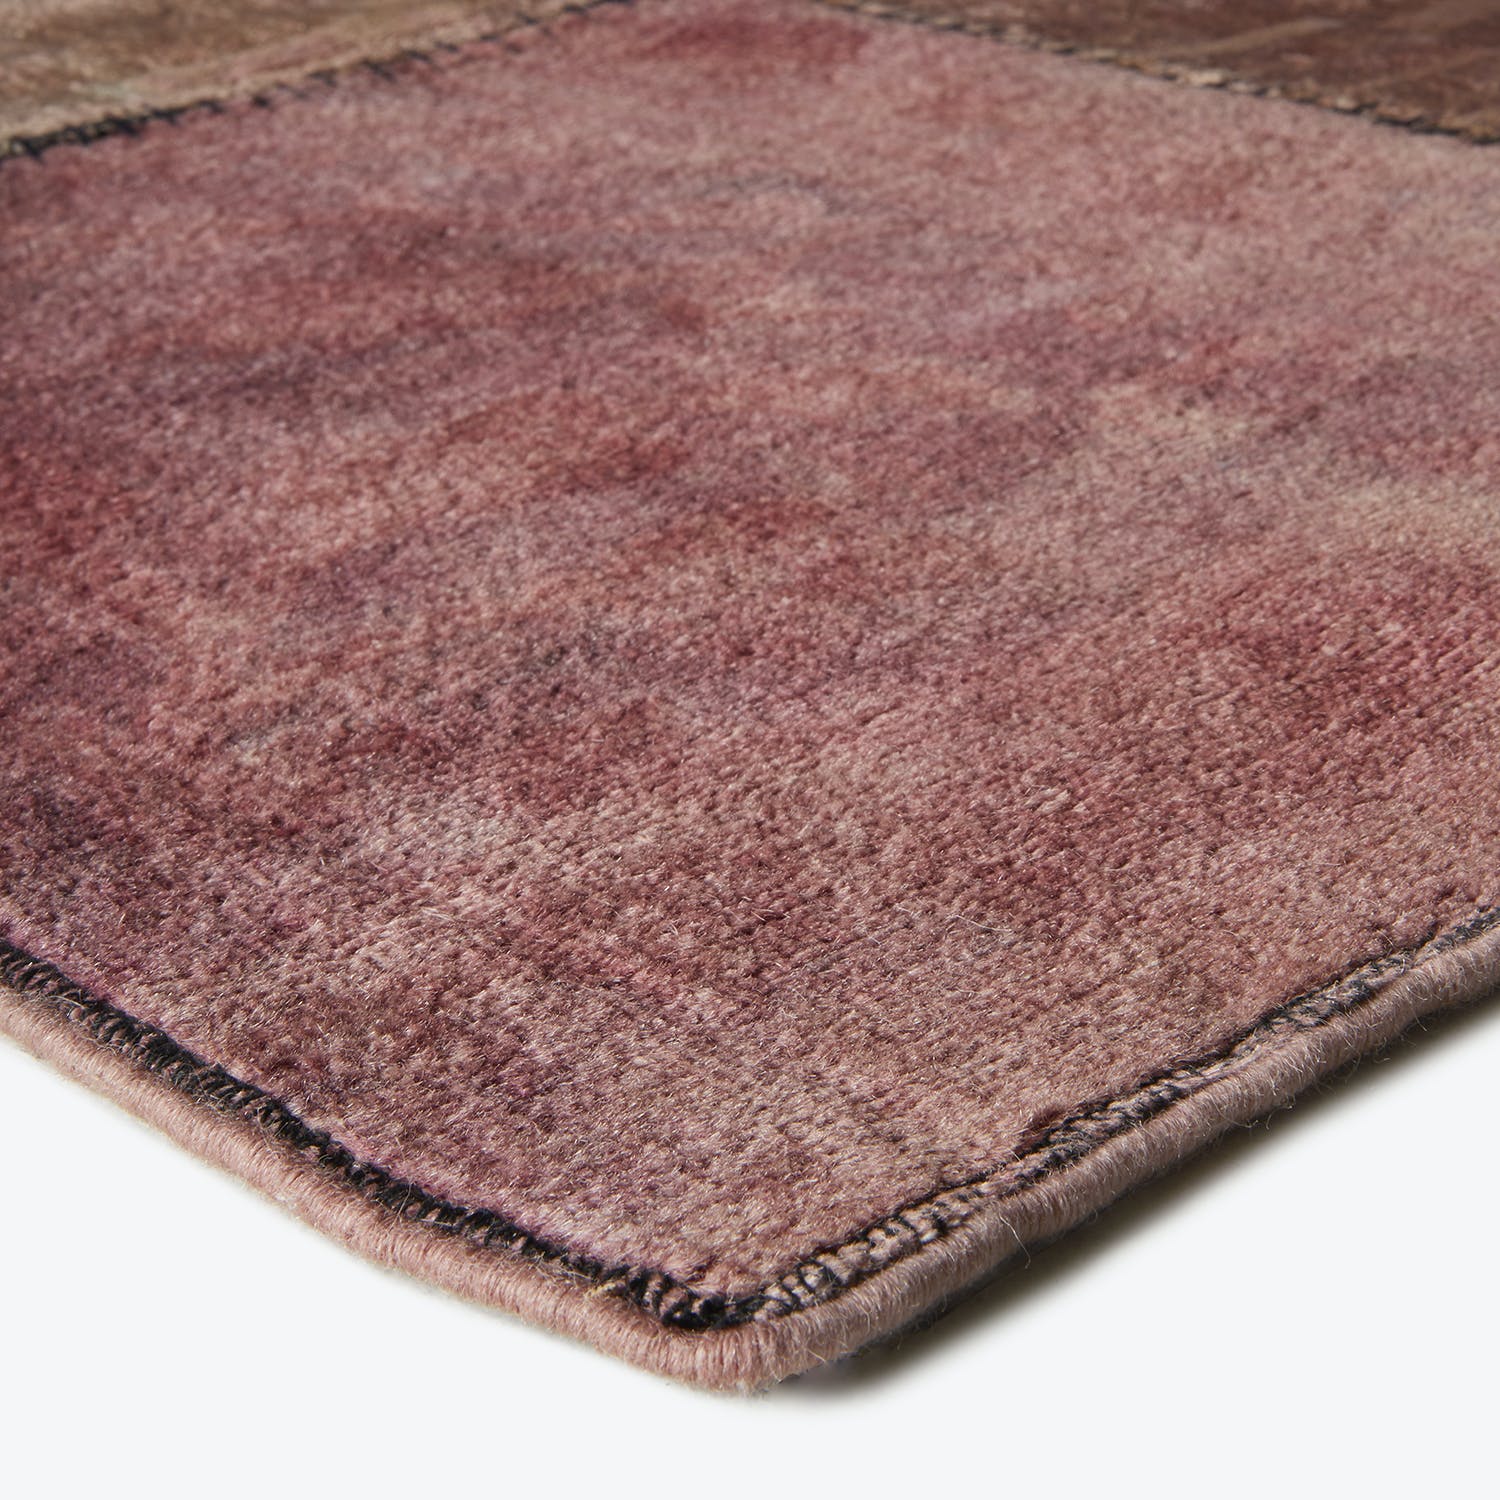 Close-up of a plush, ombré rug with bound edges.